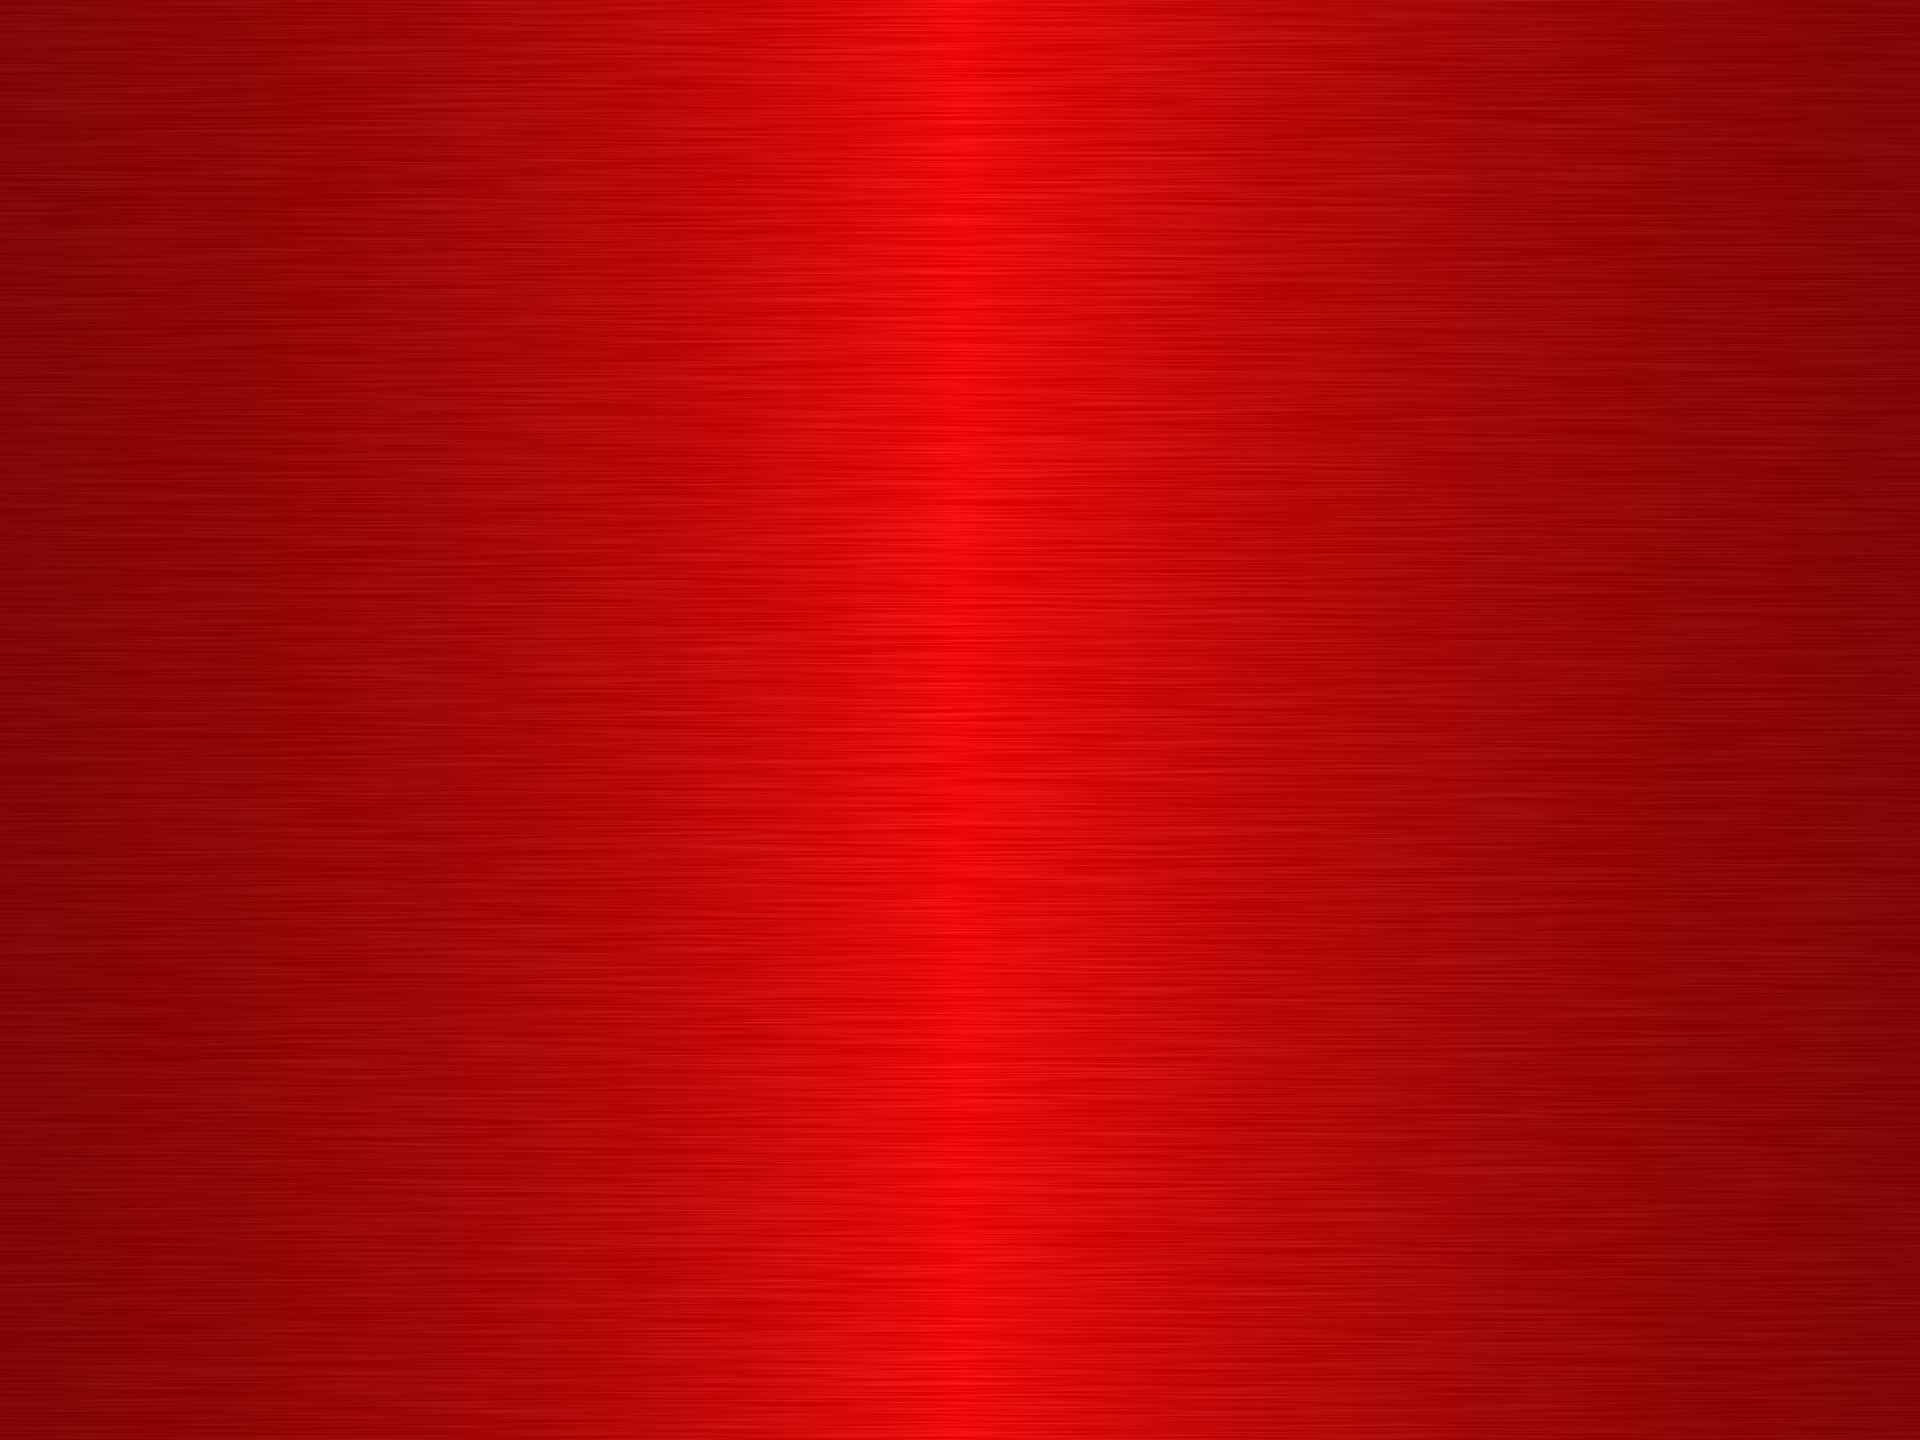 100+] Reds Backgrounds